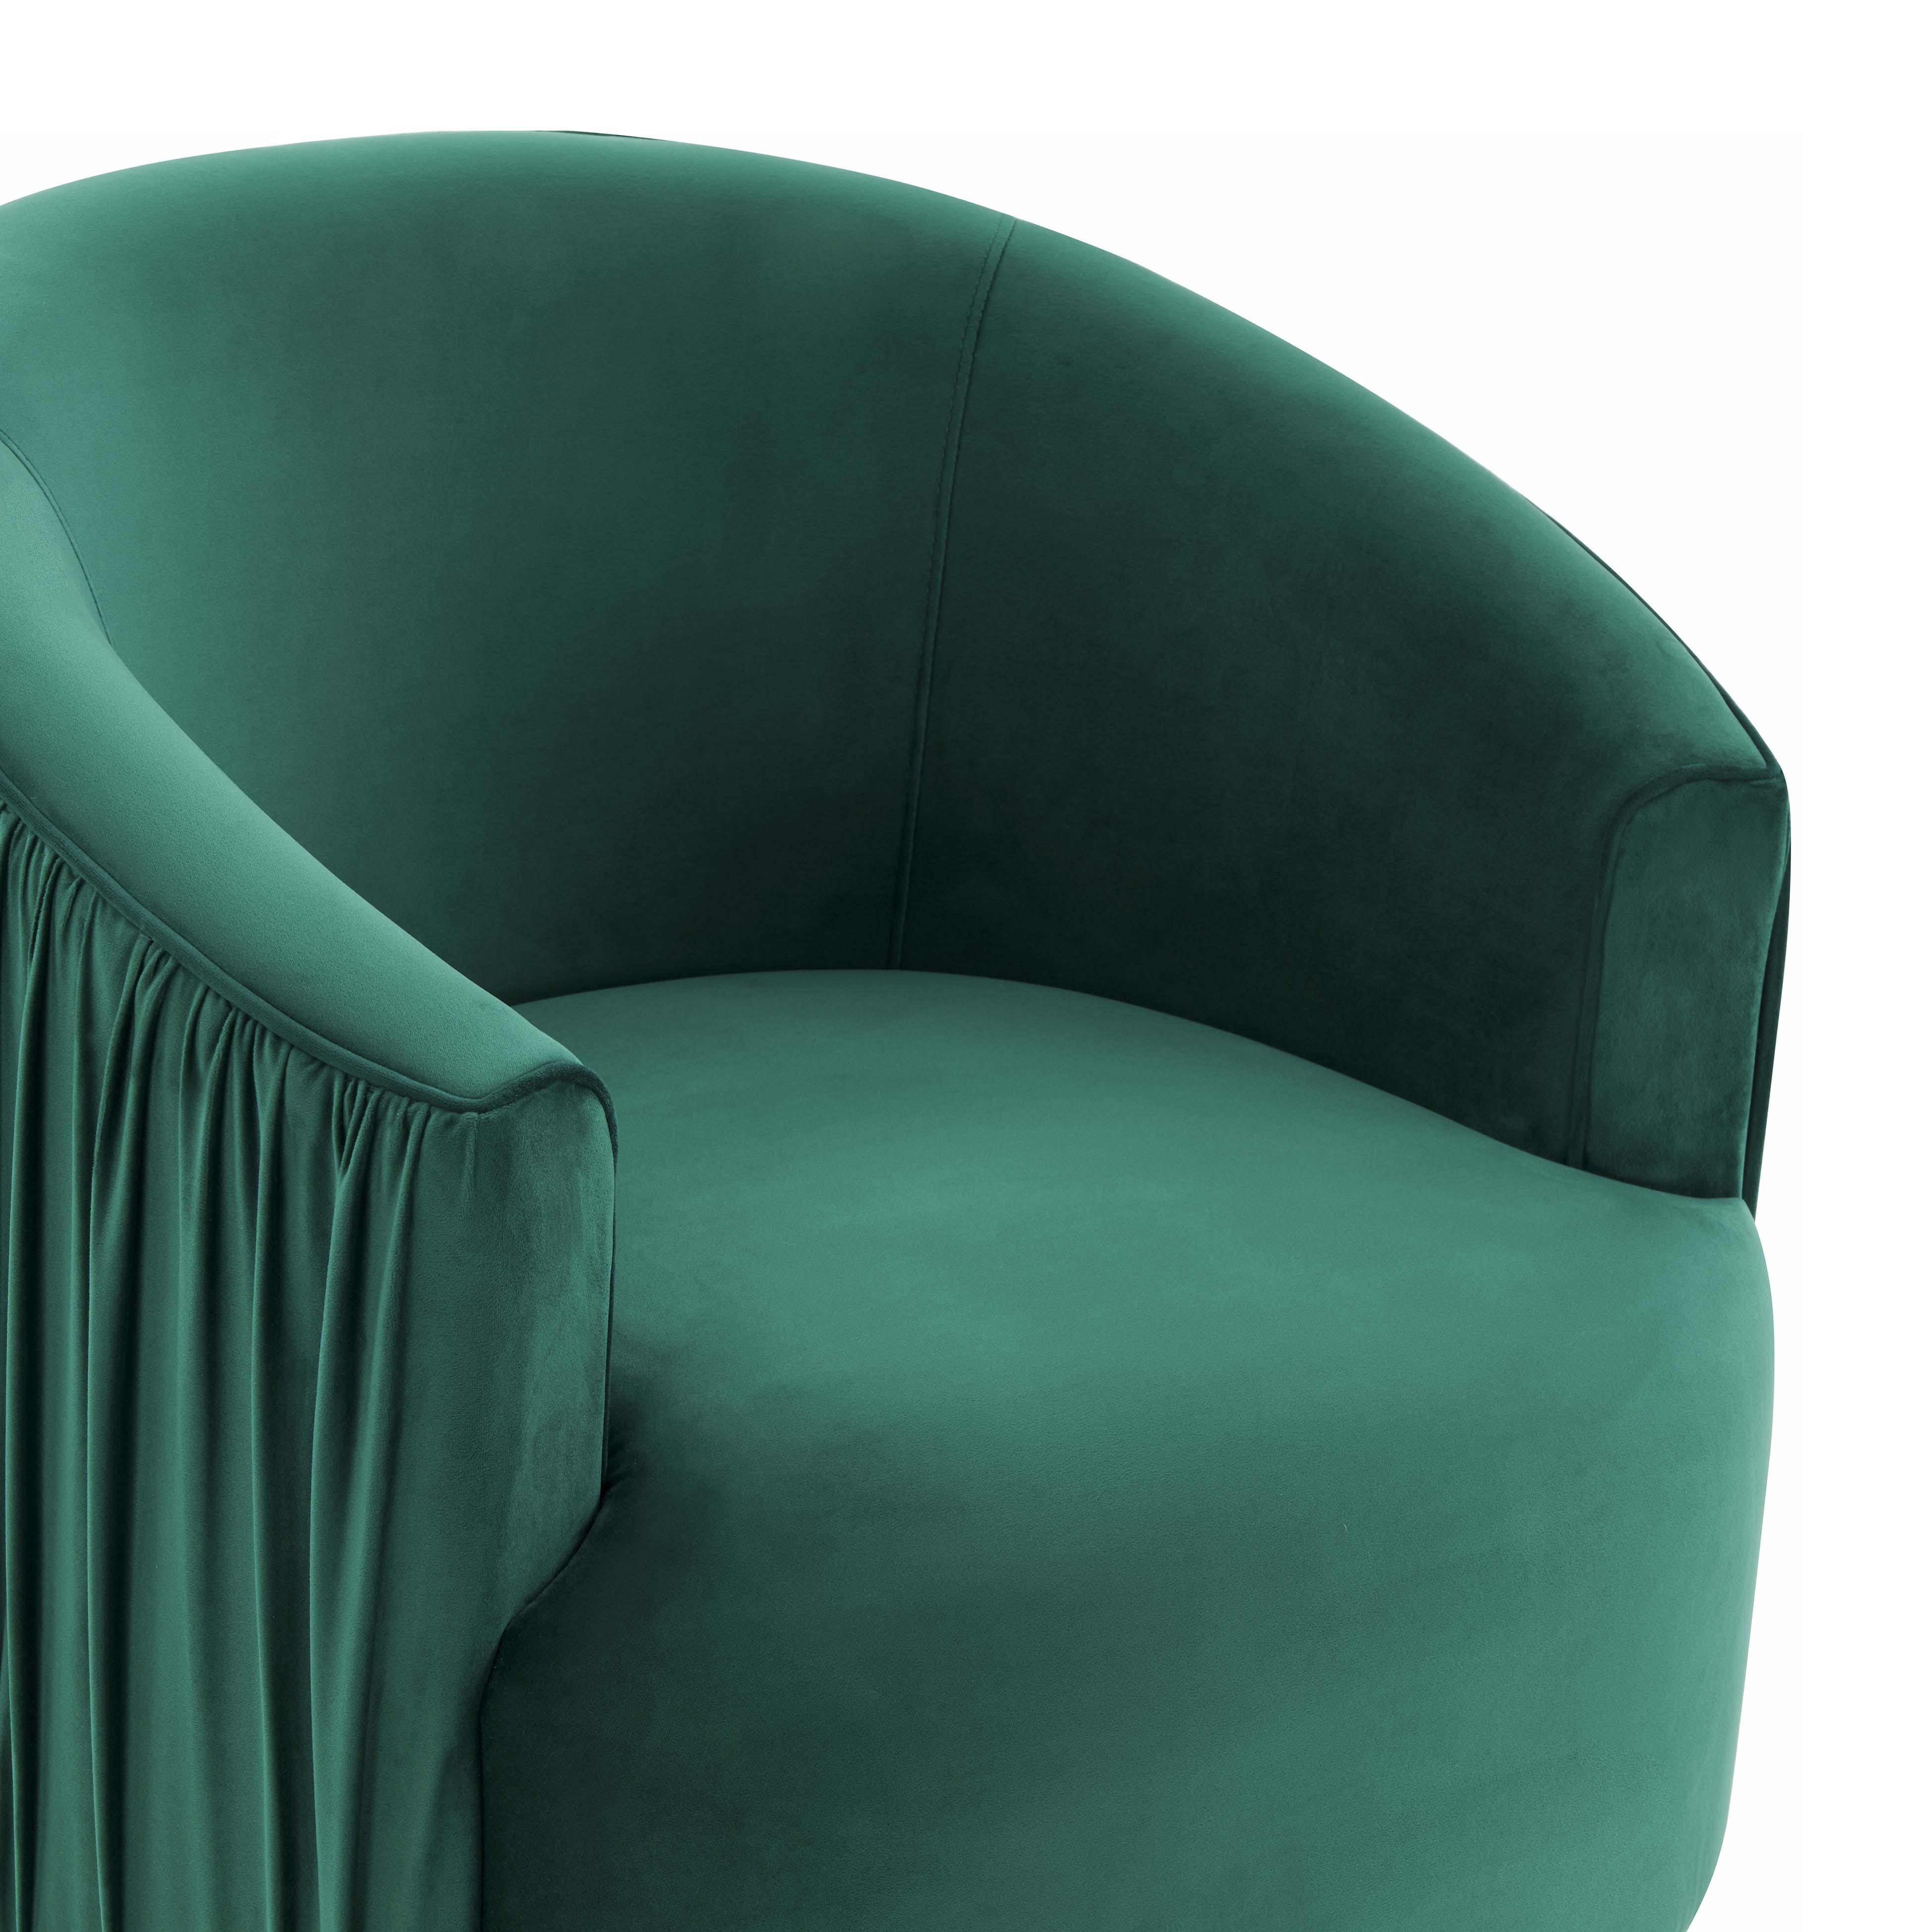 London Forest Green Pleated Swivel Chair - Image 3